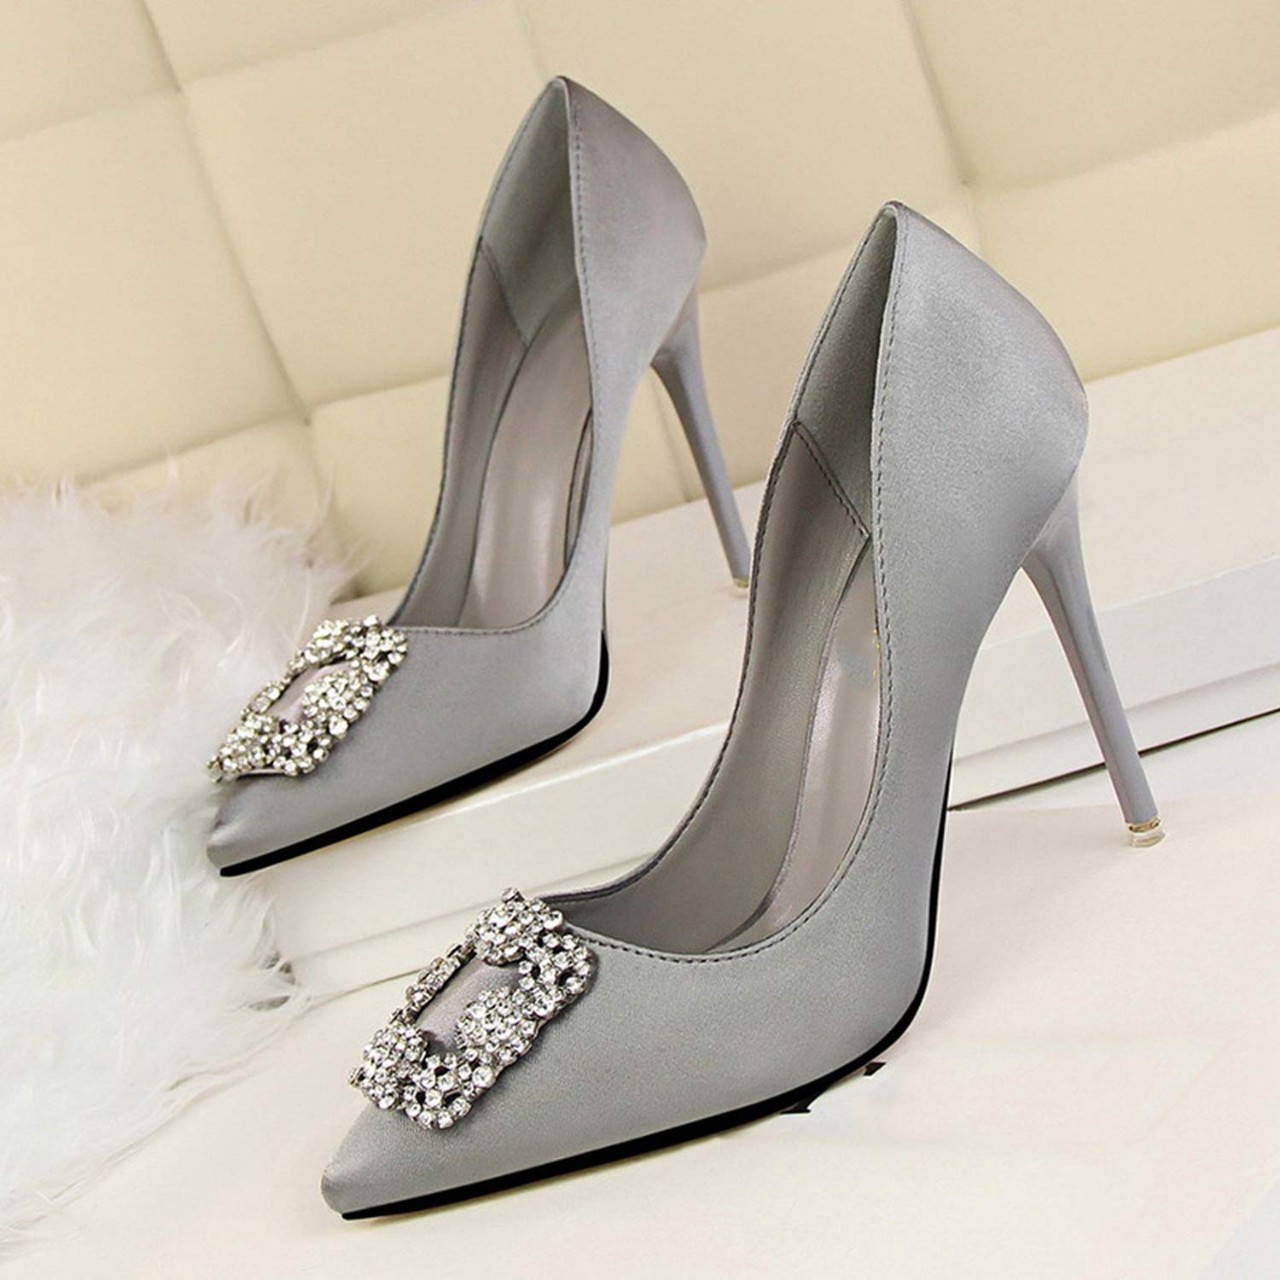 Silk Women Pumps High Heels Heel Shoes Pointed Toe Ladies Shoes Extreme Pumps